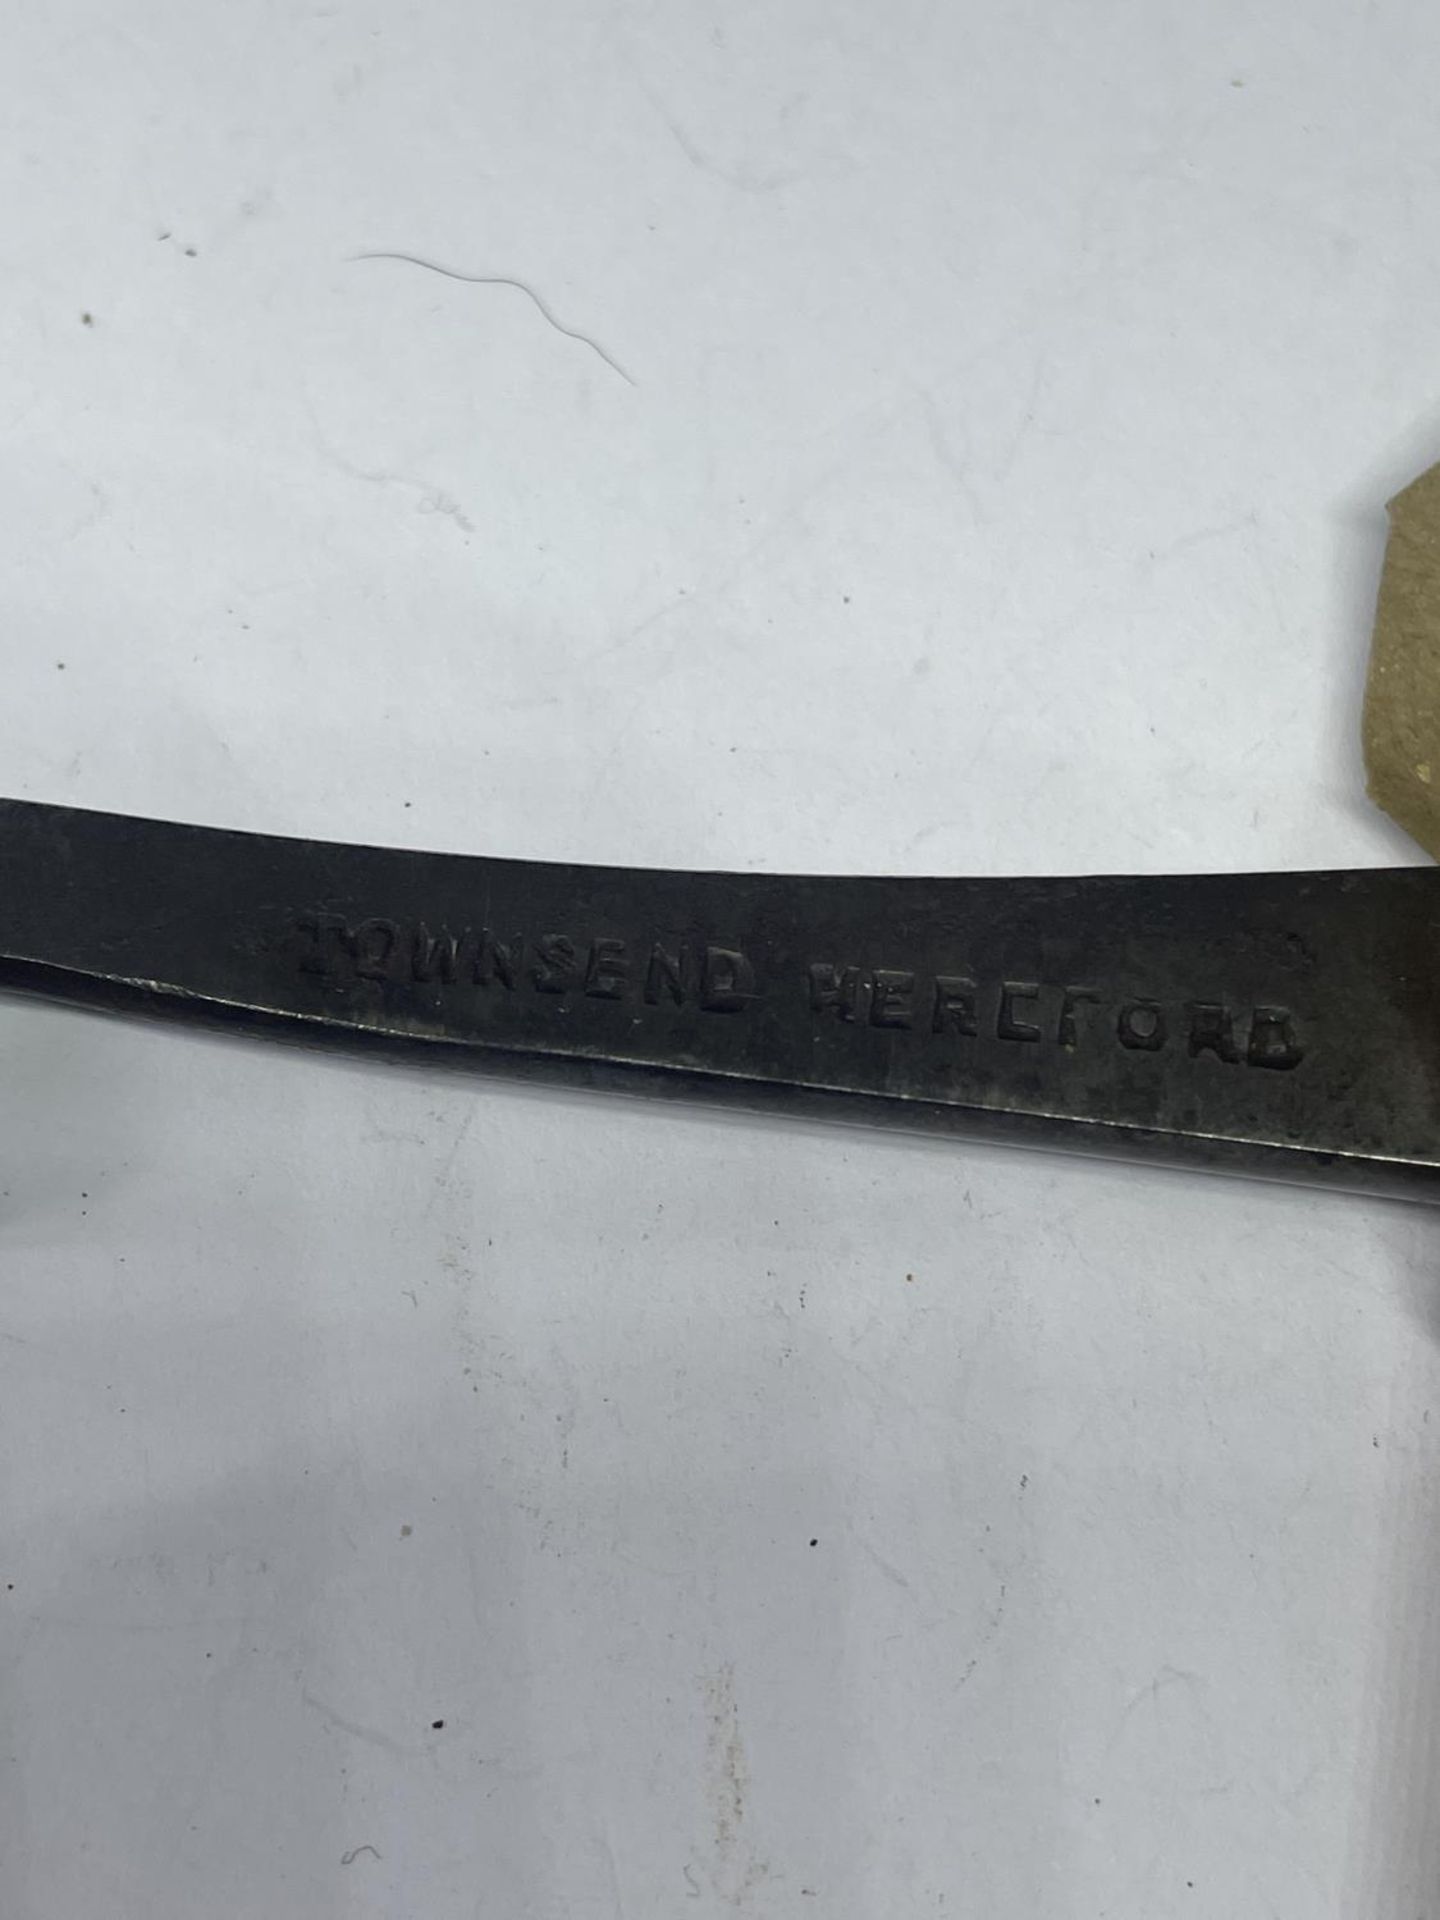 A VINTAGE TOWNSEND HEREFORD HORSEMANS TOOL - Image 2 of 4